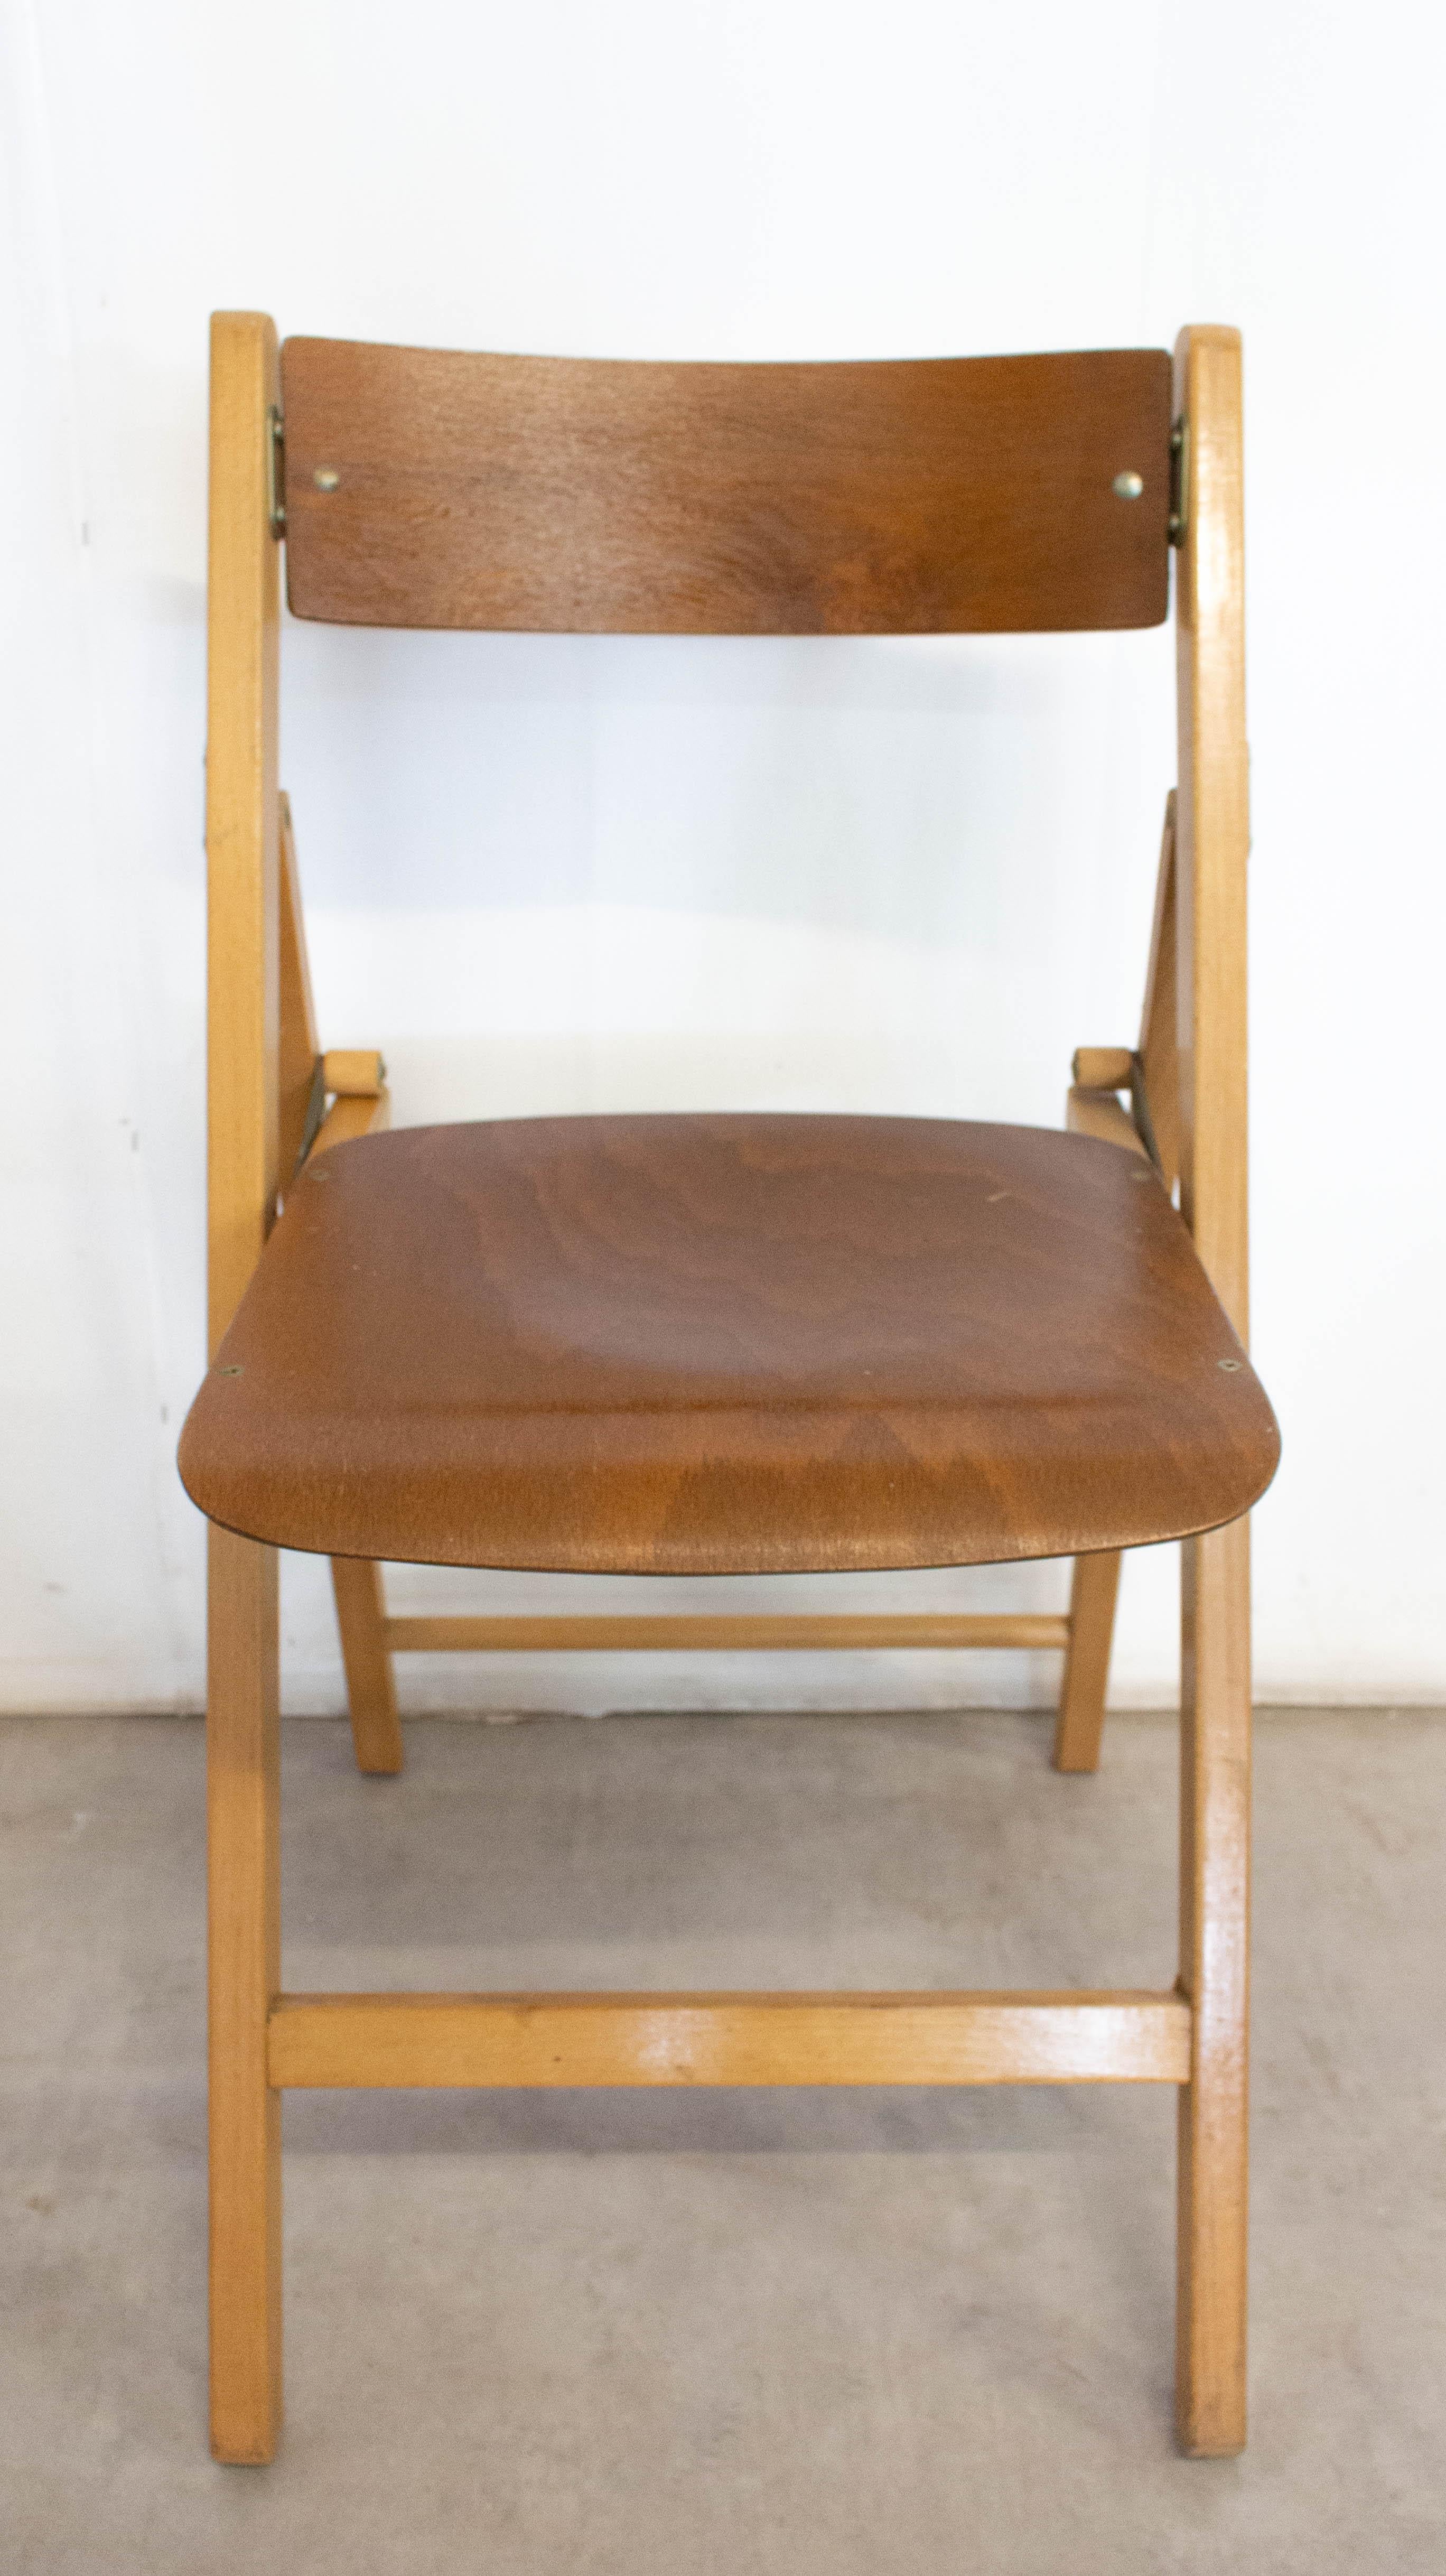 French wood folding chair, circa 1970
Folded: D 2.54 x W 6.83 x H 33 in.
Very good condition

For shipping: 6 x 41 x 84 cm.